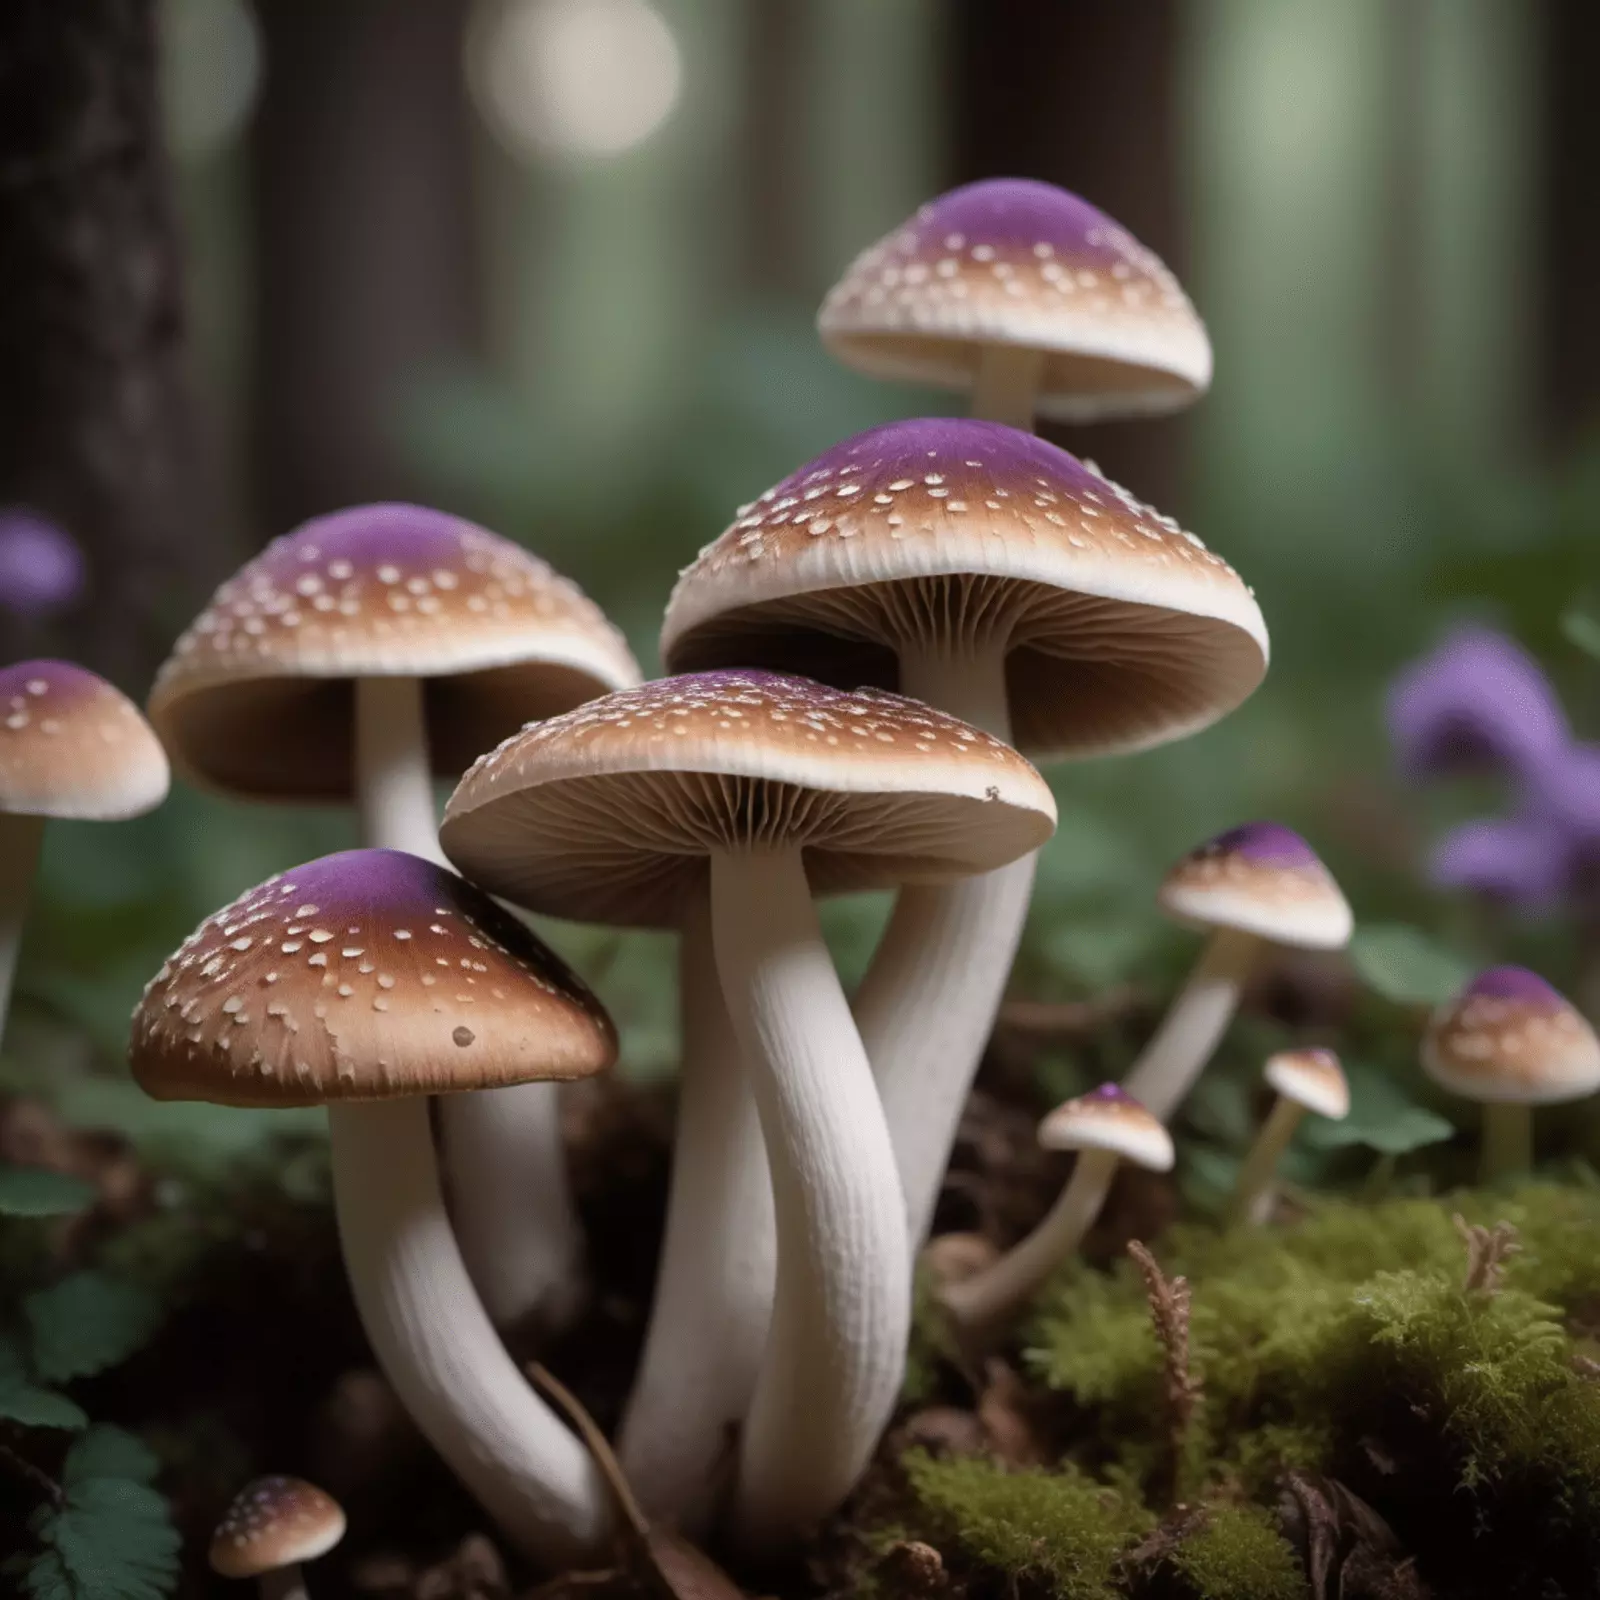 How To Identify Magic Mushrooms and Stay Safe